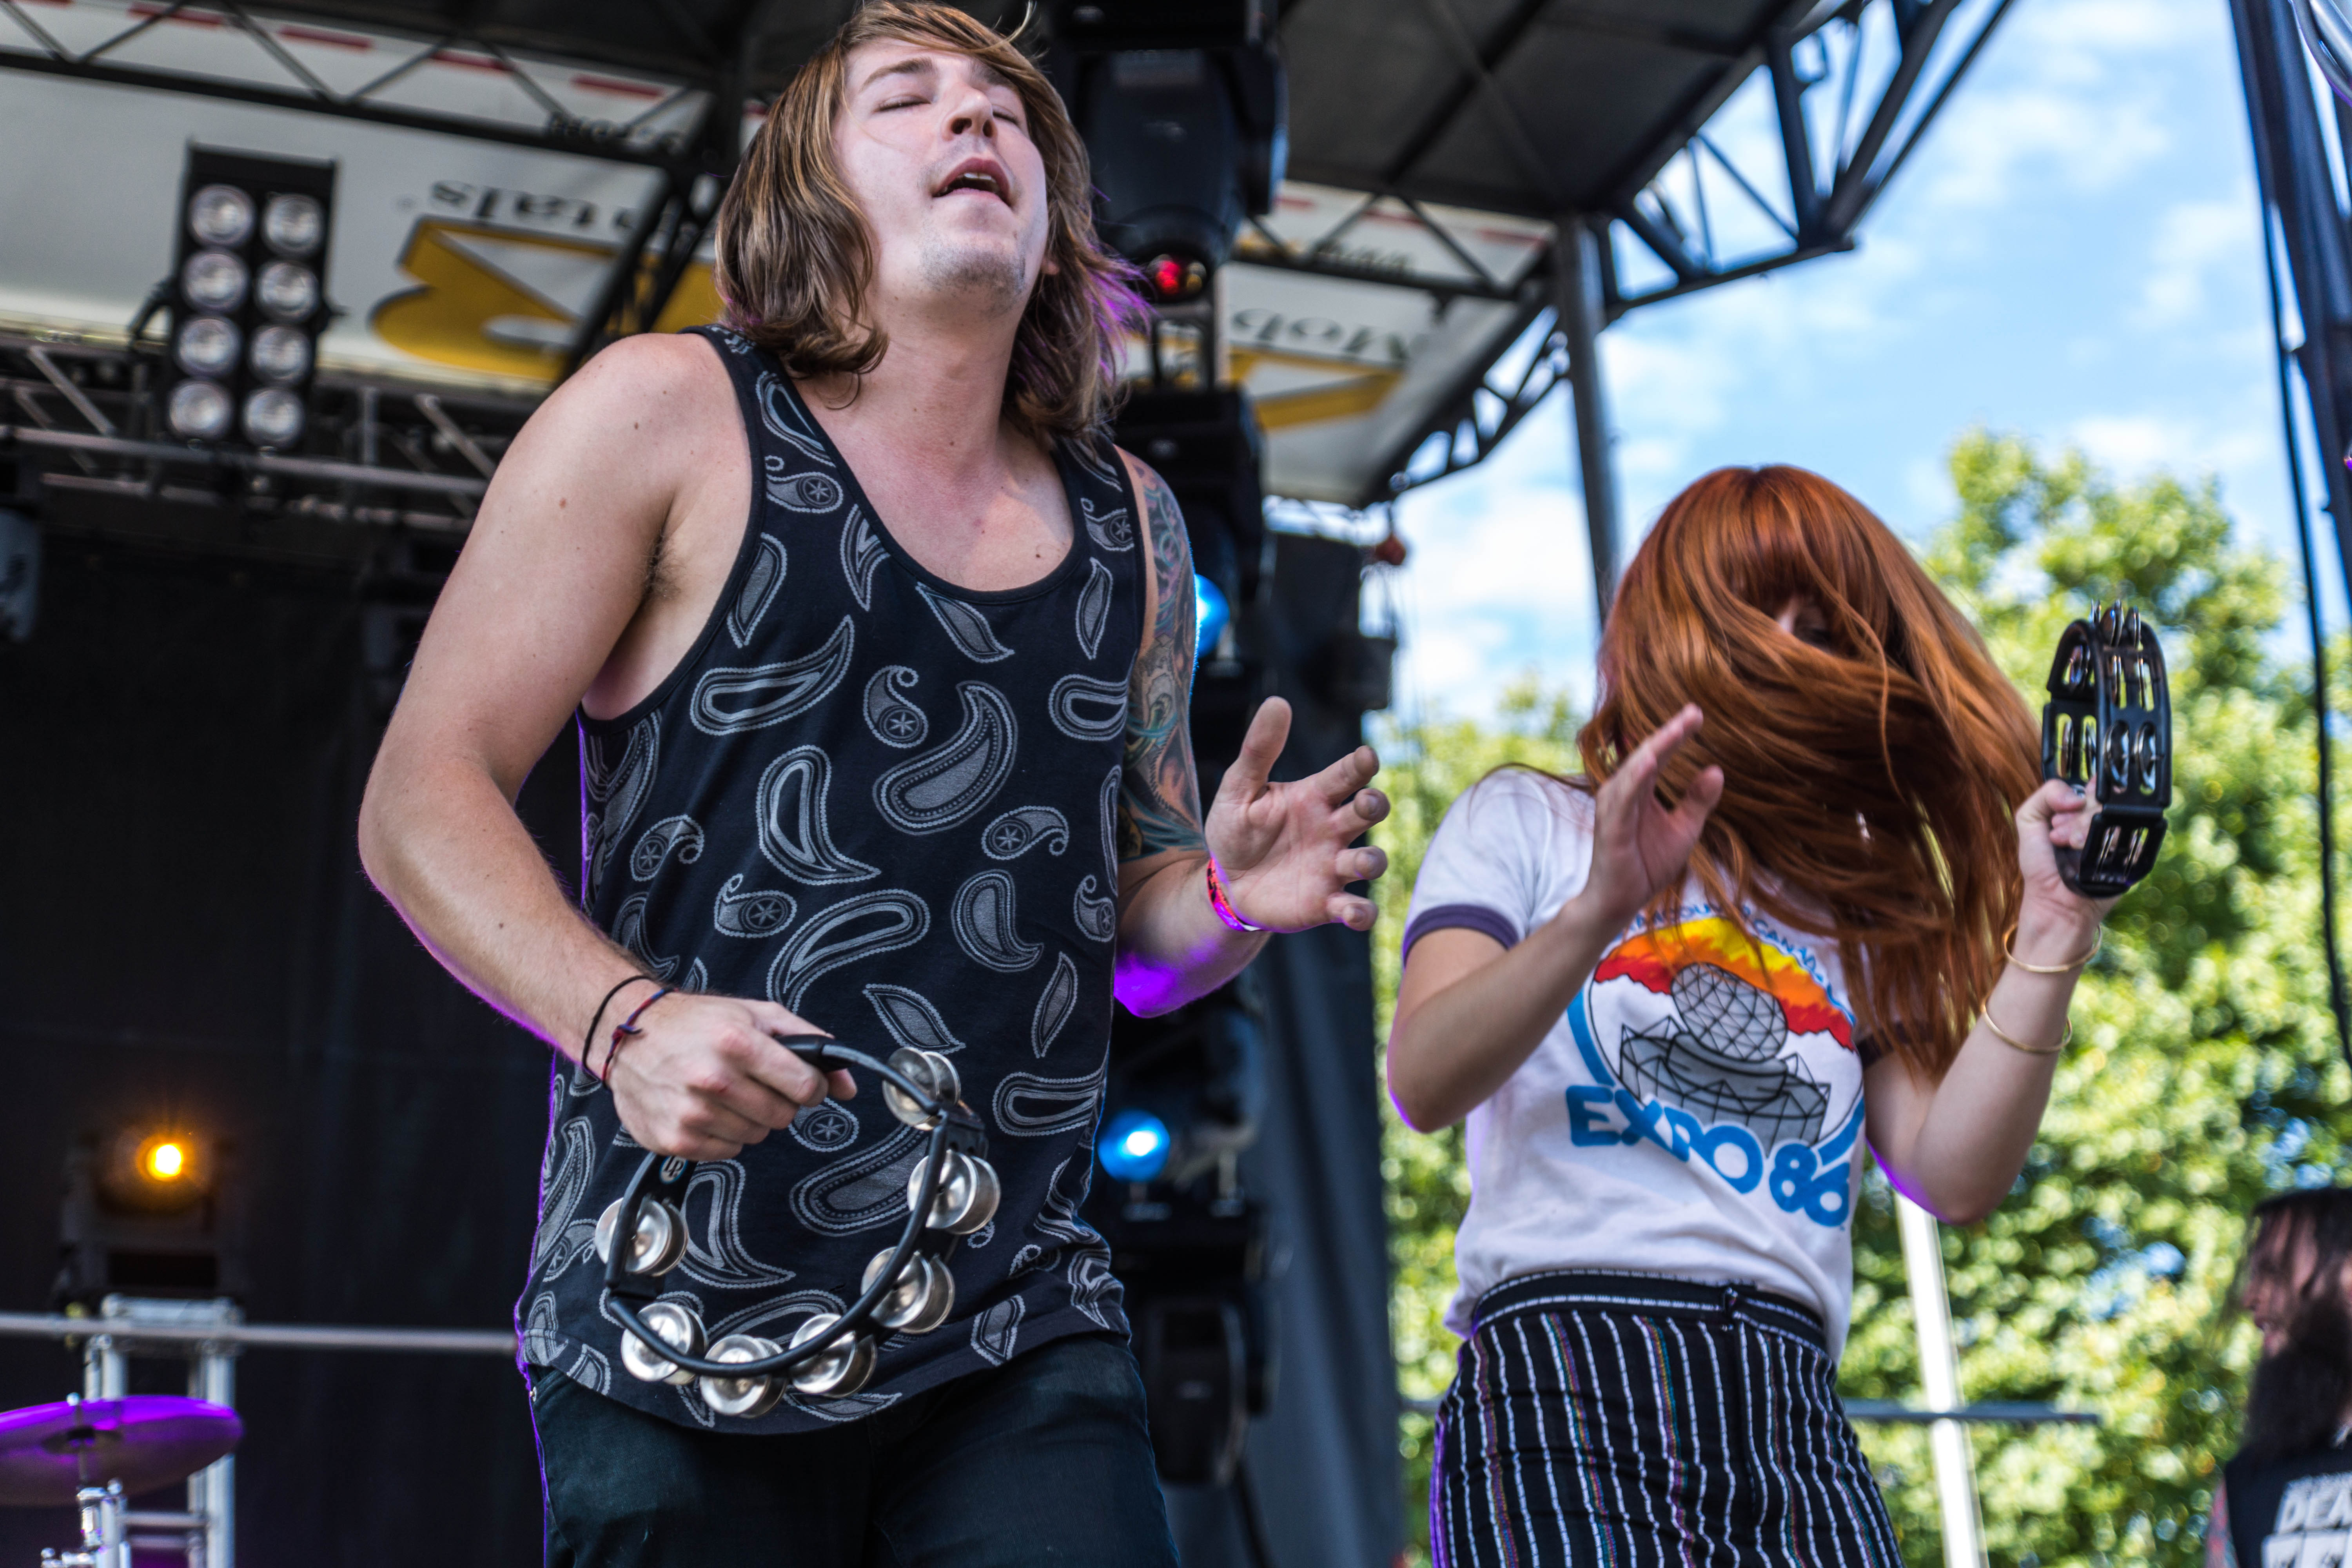 Bumbershoot 2013 Day 1 (Photo by Greg Roth)